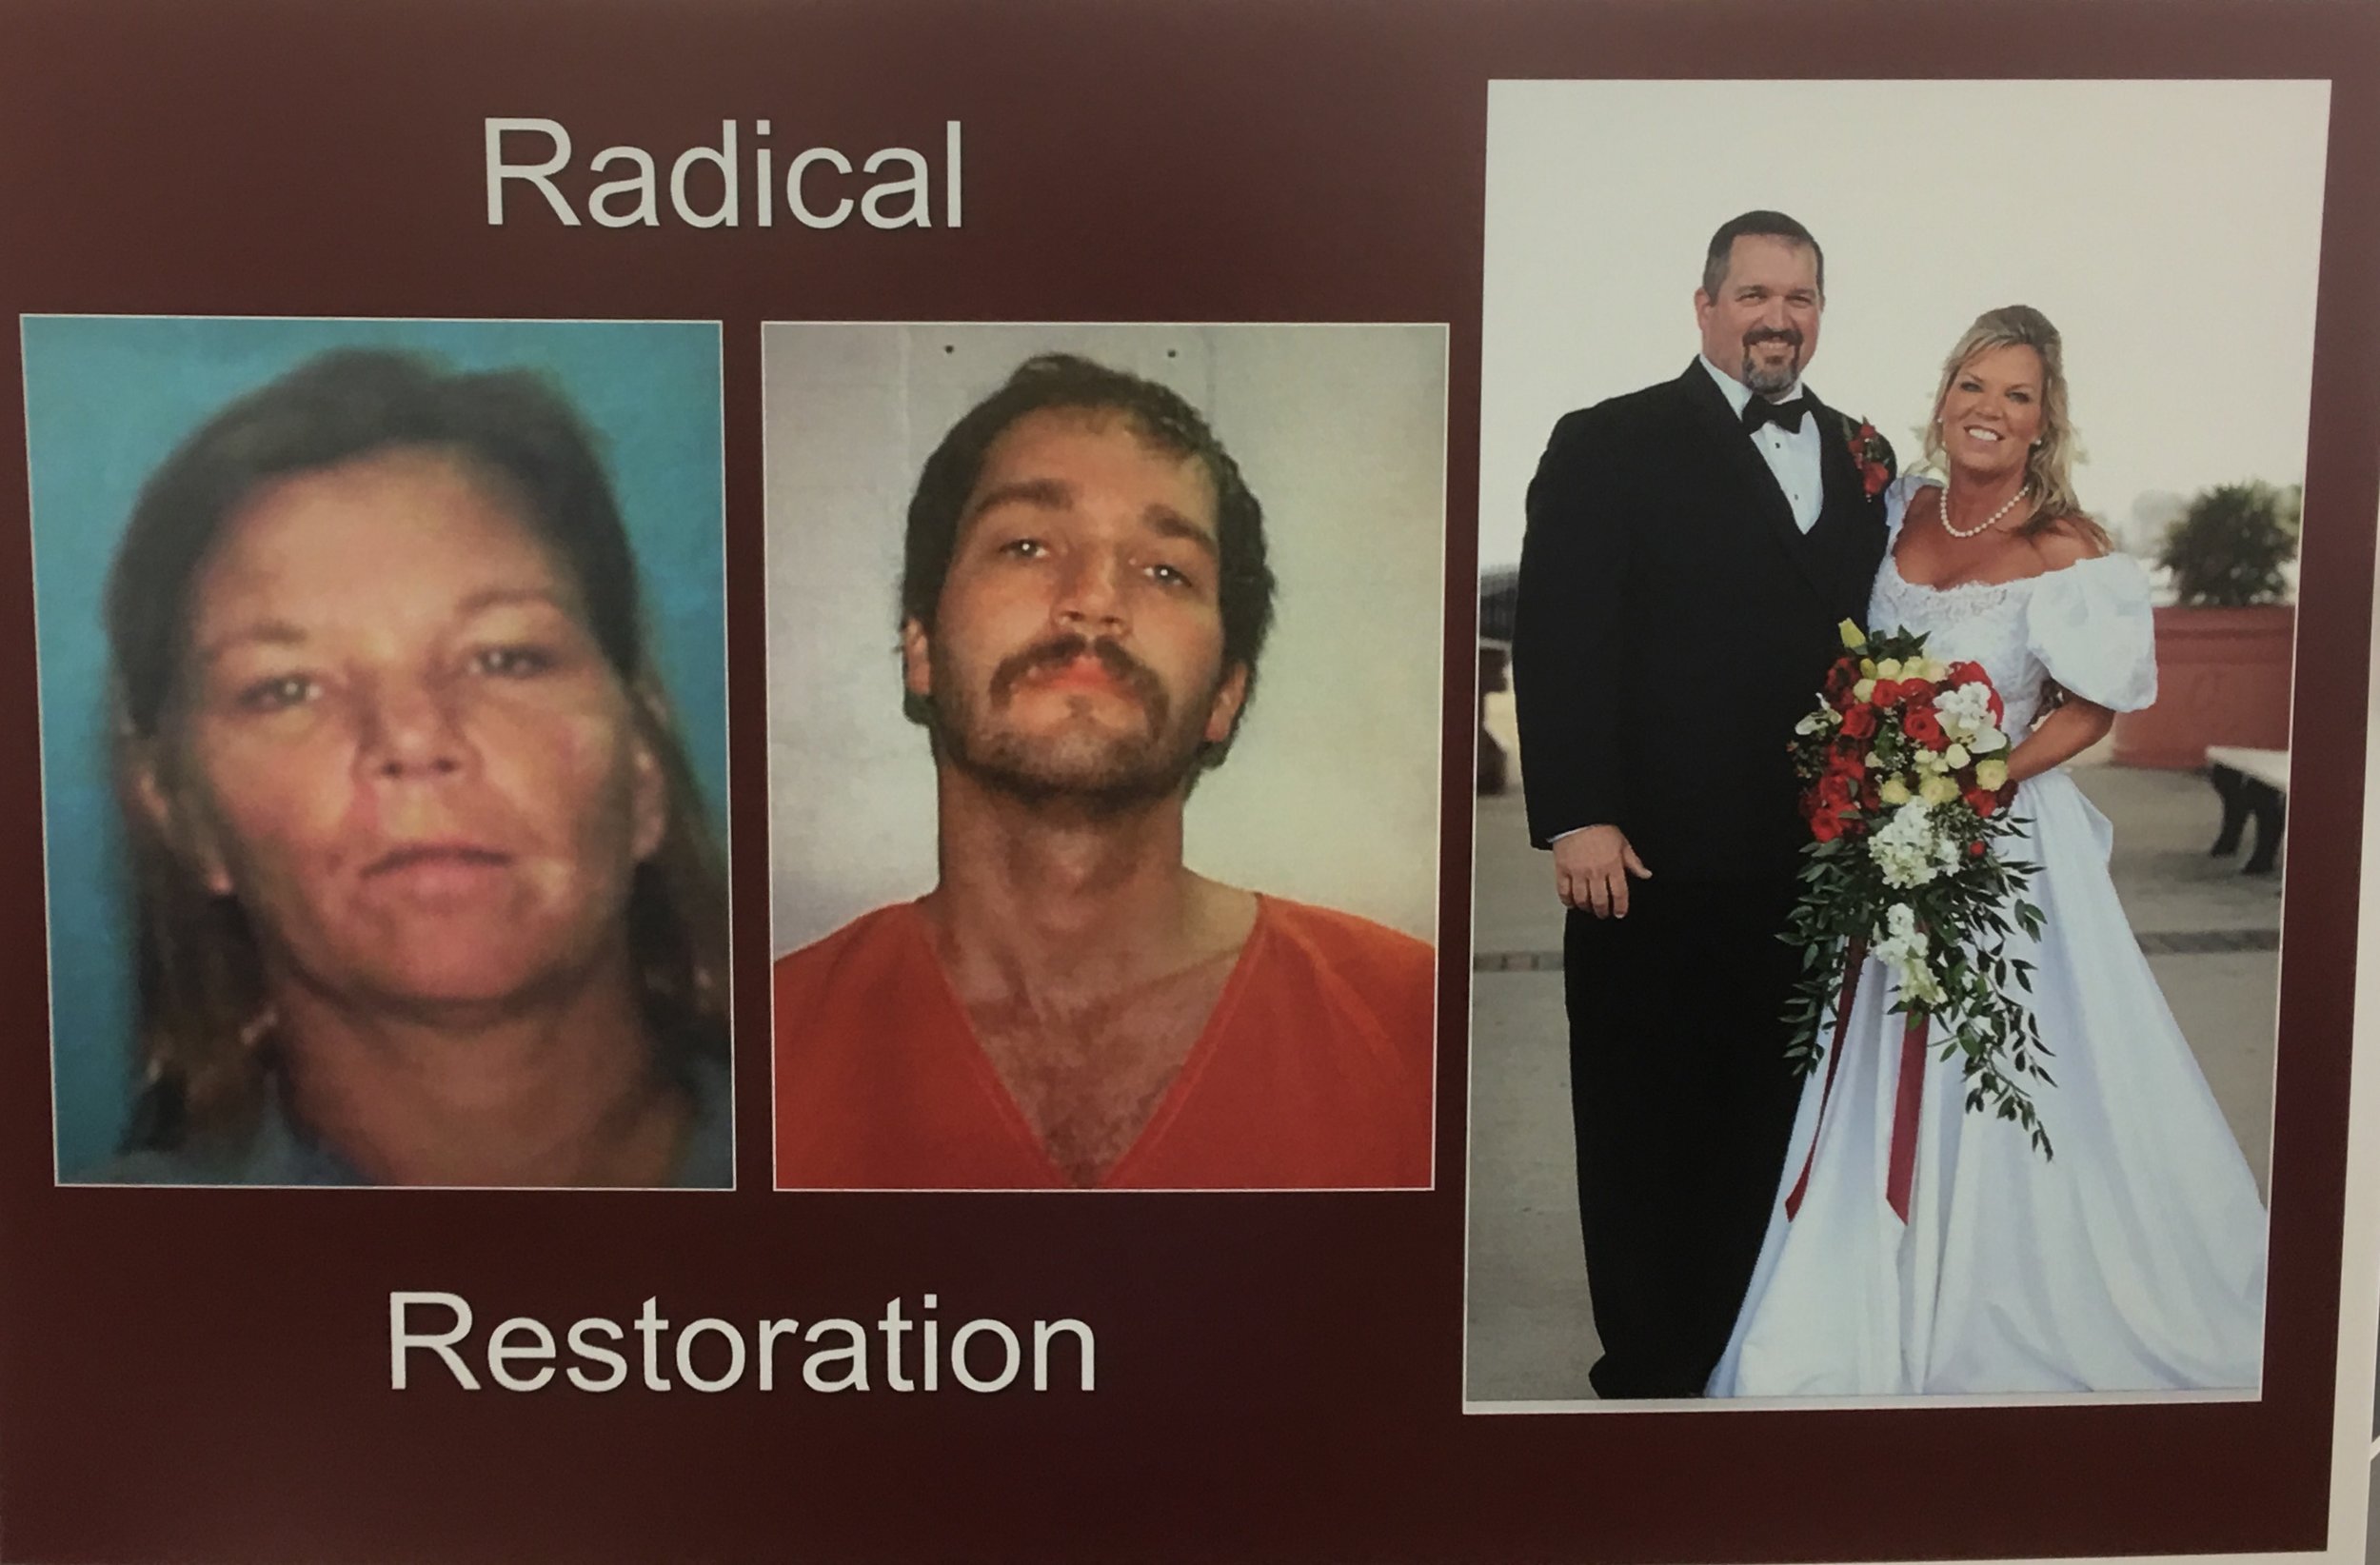 Dawn and Ron Adkins, before and after Christ